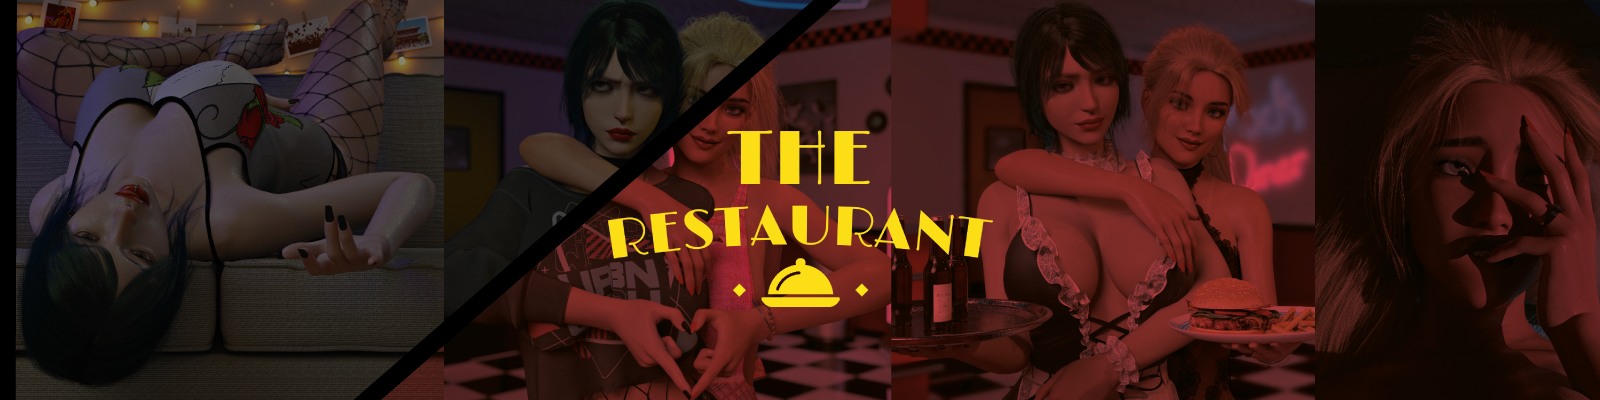 The Restaurant [Xell] Adult xxx Game Download